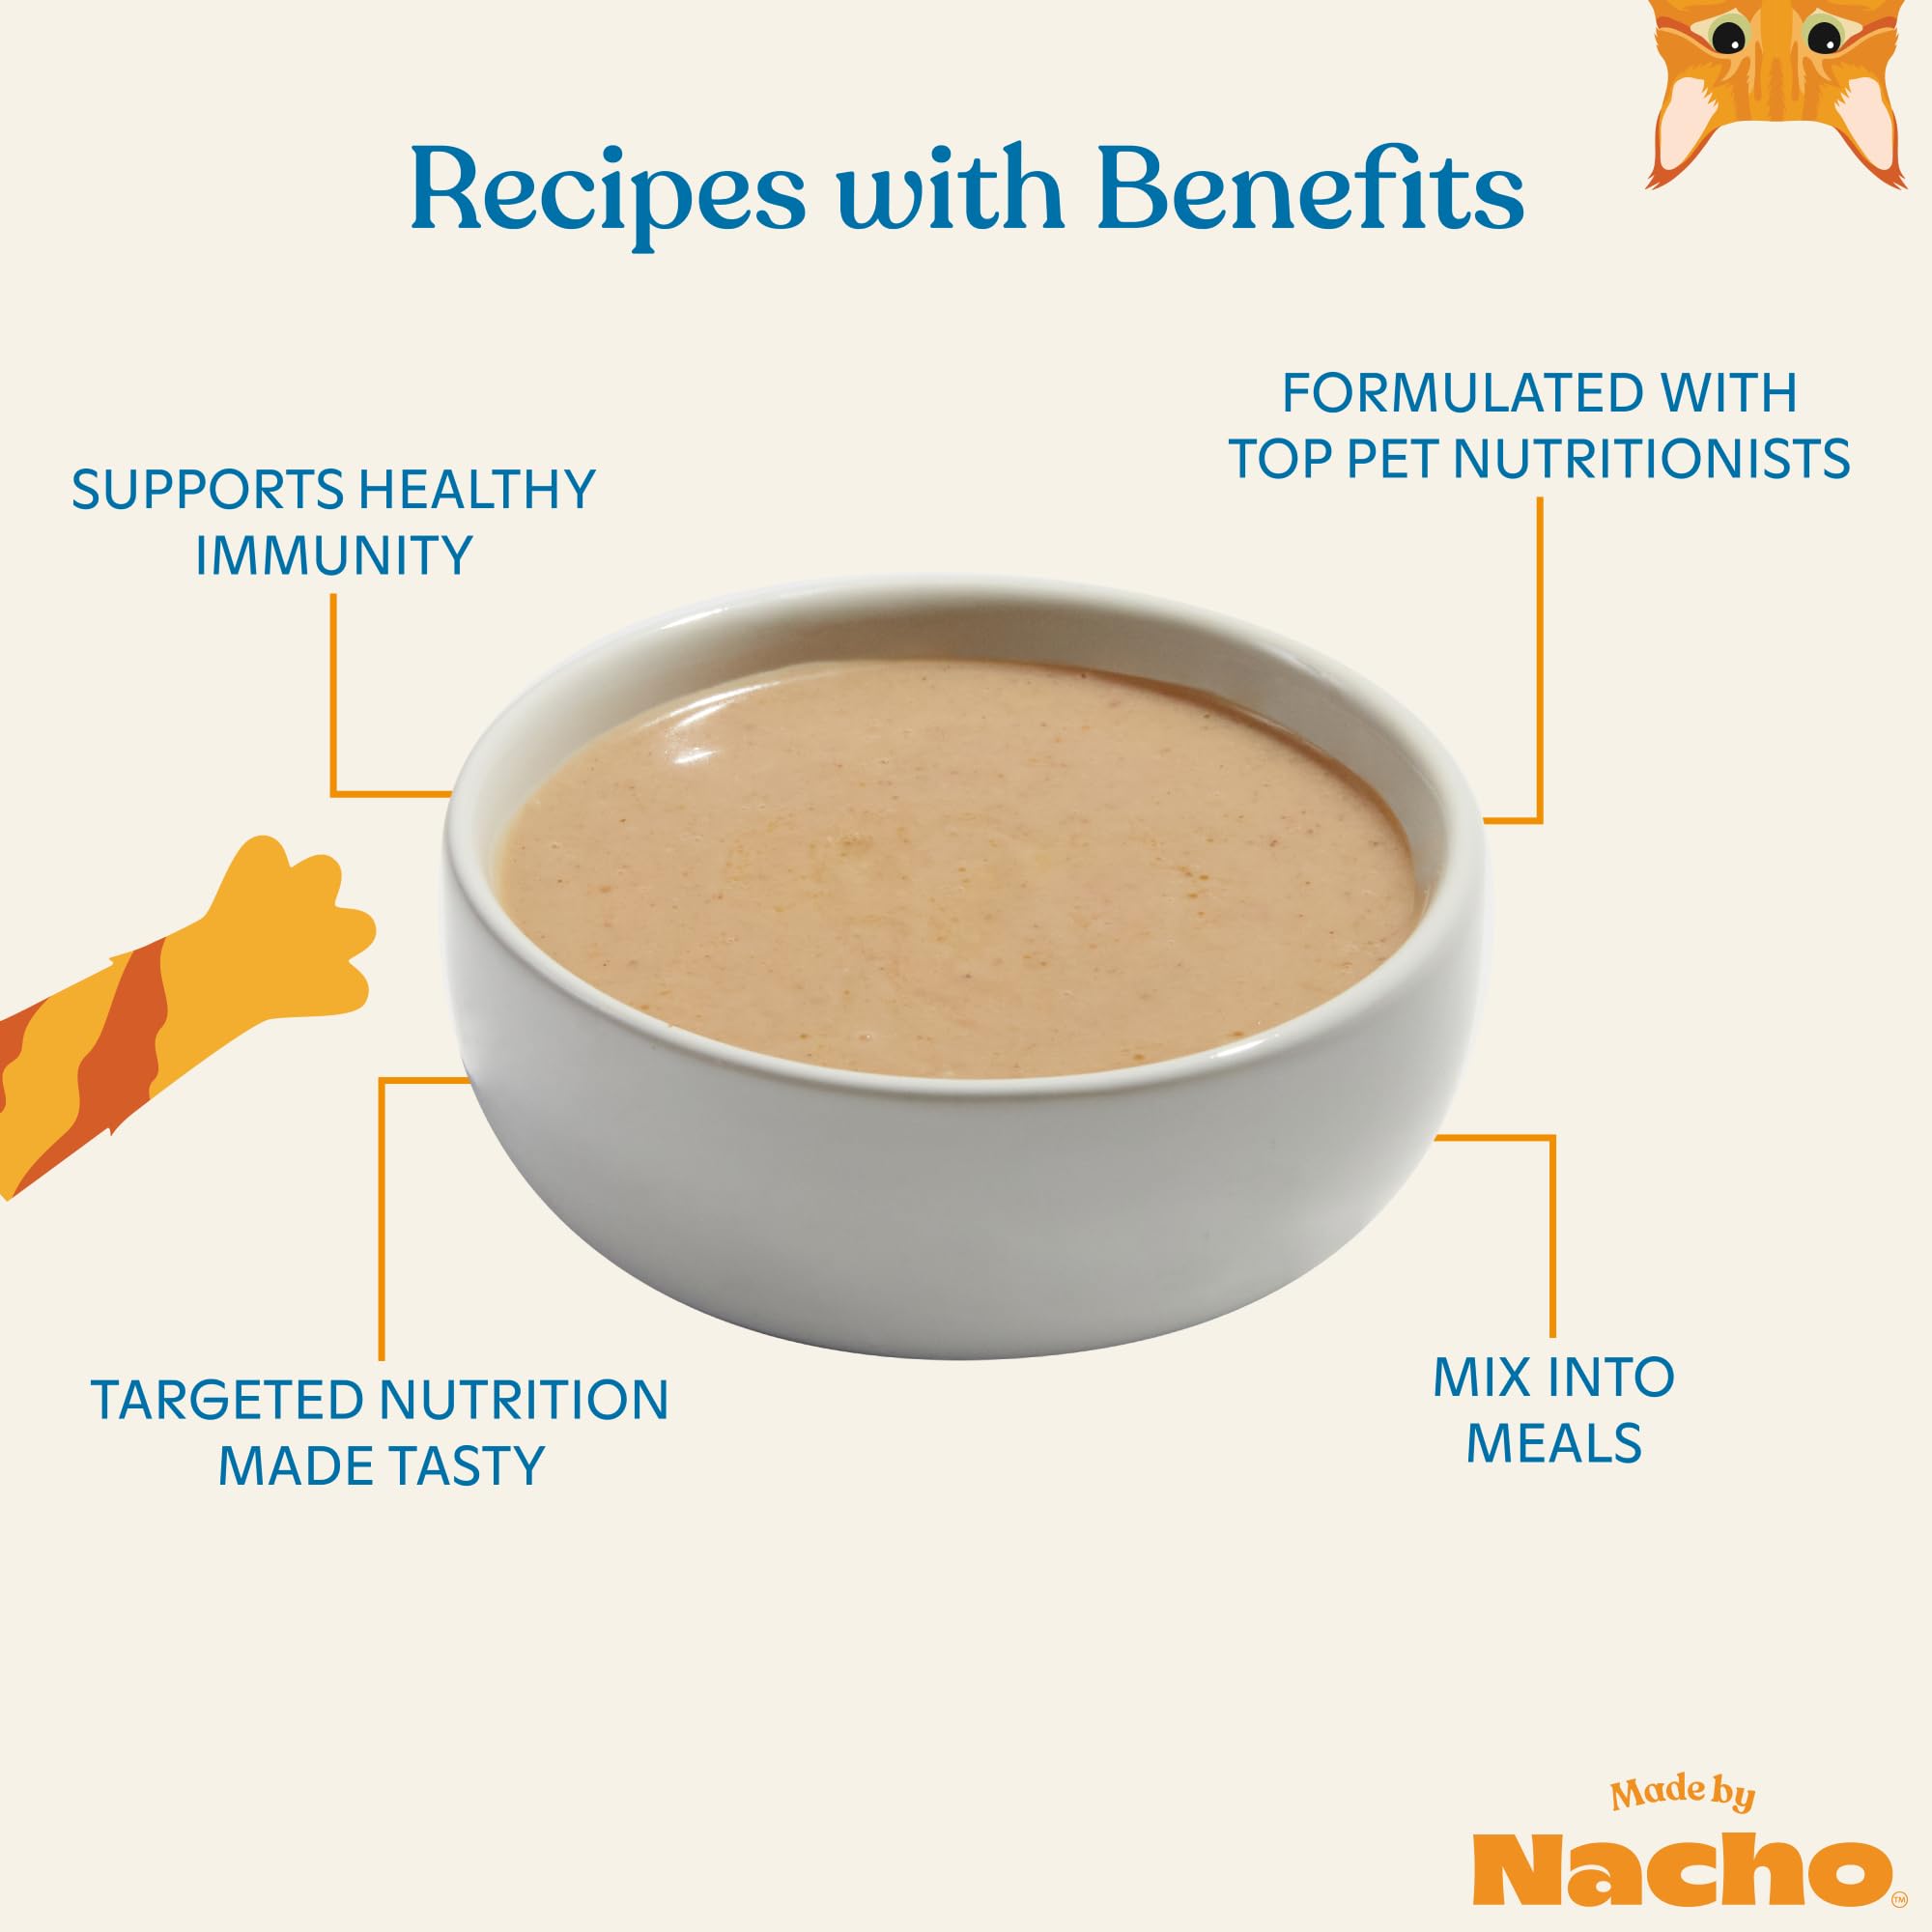 Made by Nacho Digestive Support Chicken Pate Cat Food Topper Pouch - 1.4 Oz - Case of 36  